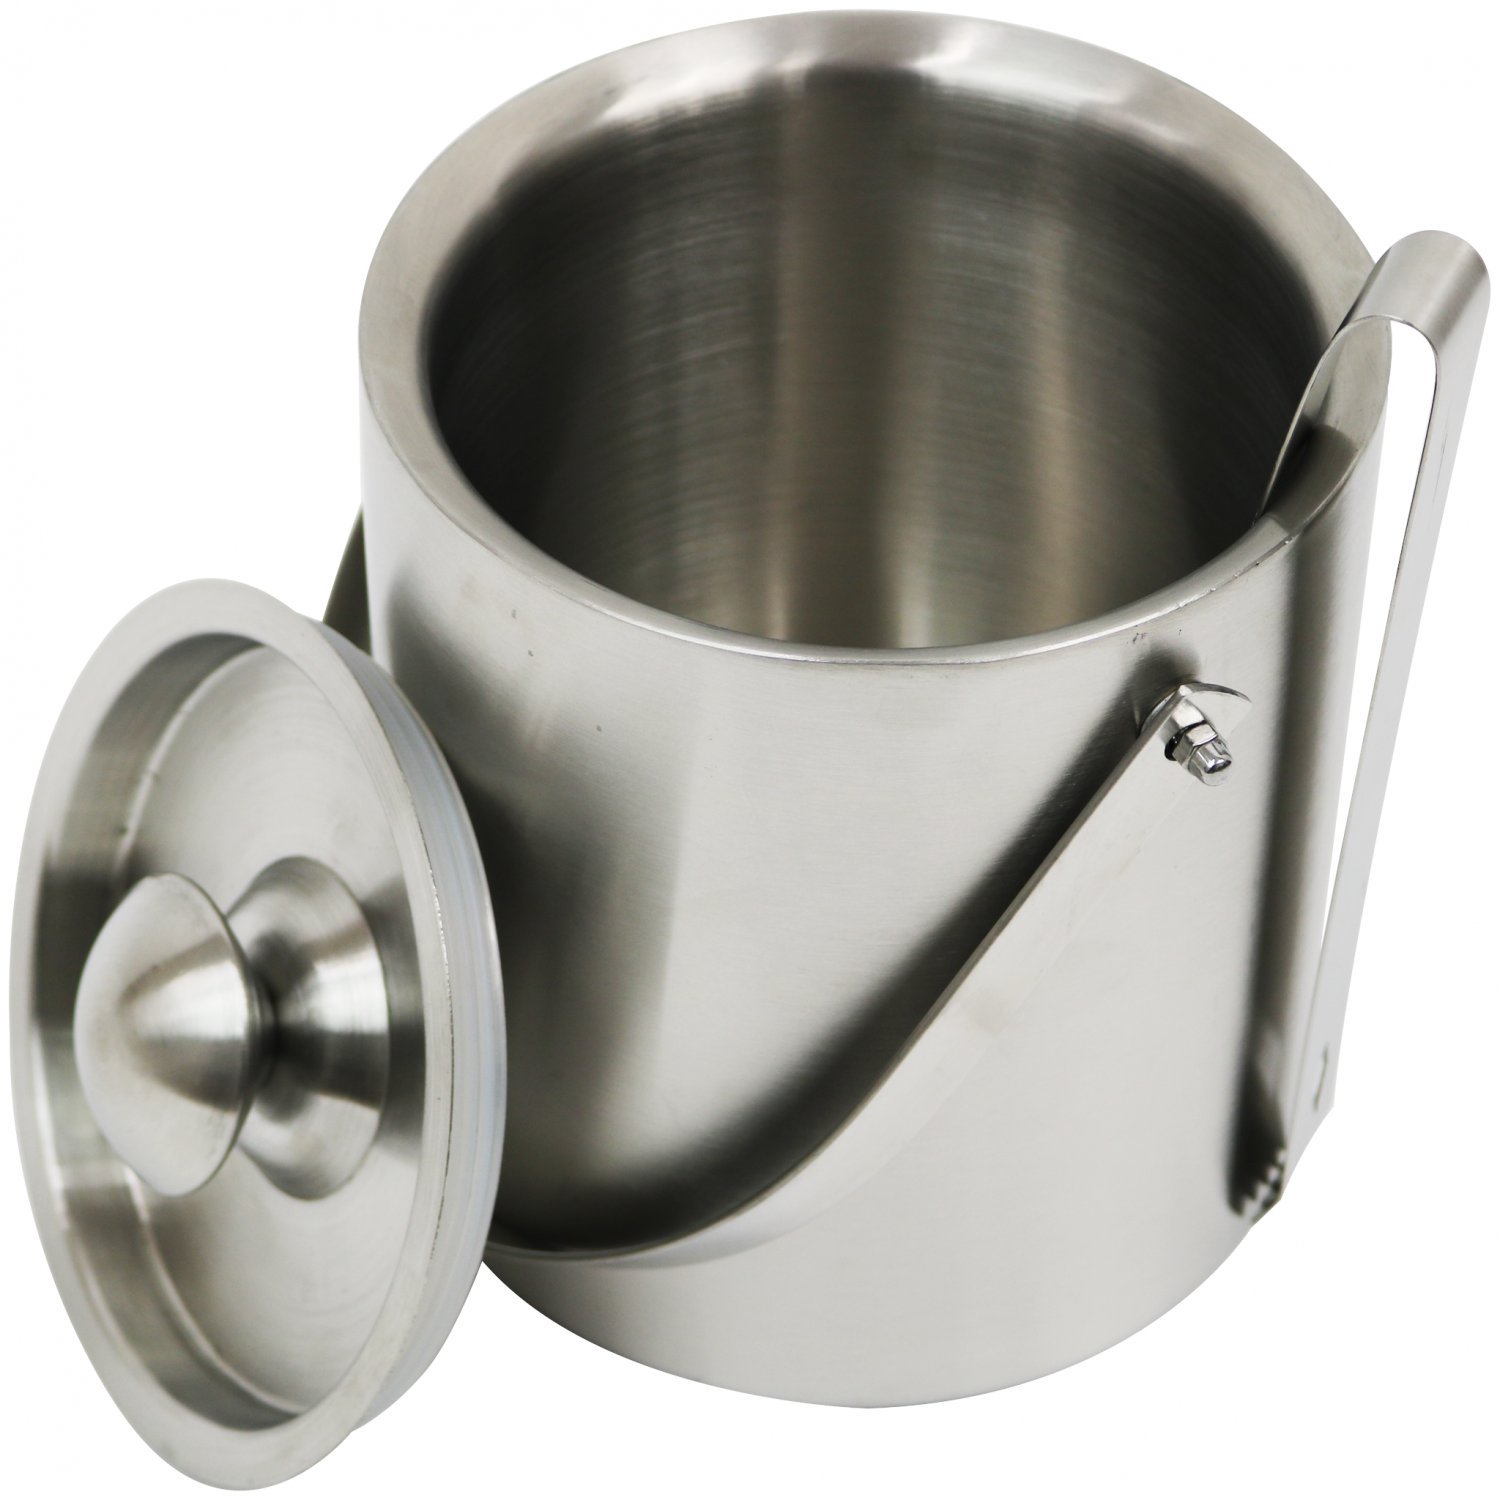 2L Stainless Steel Double Walled Ice Bucket and Lid with Tongs